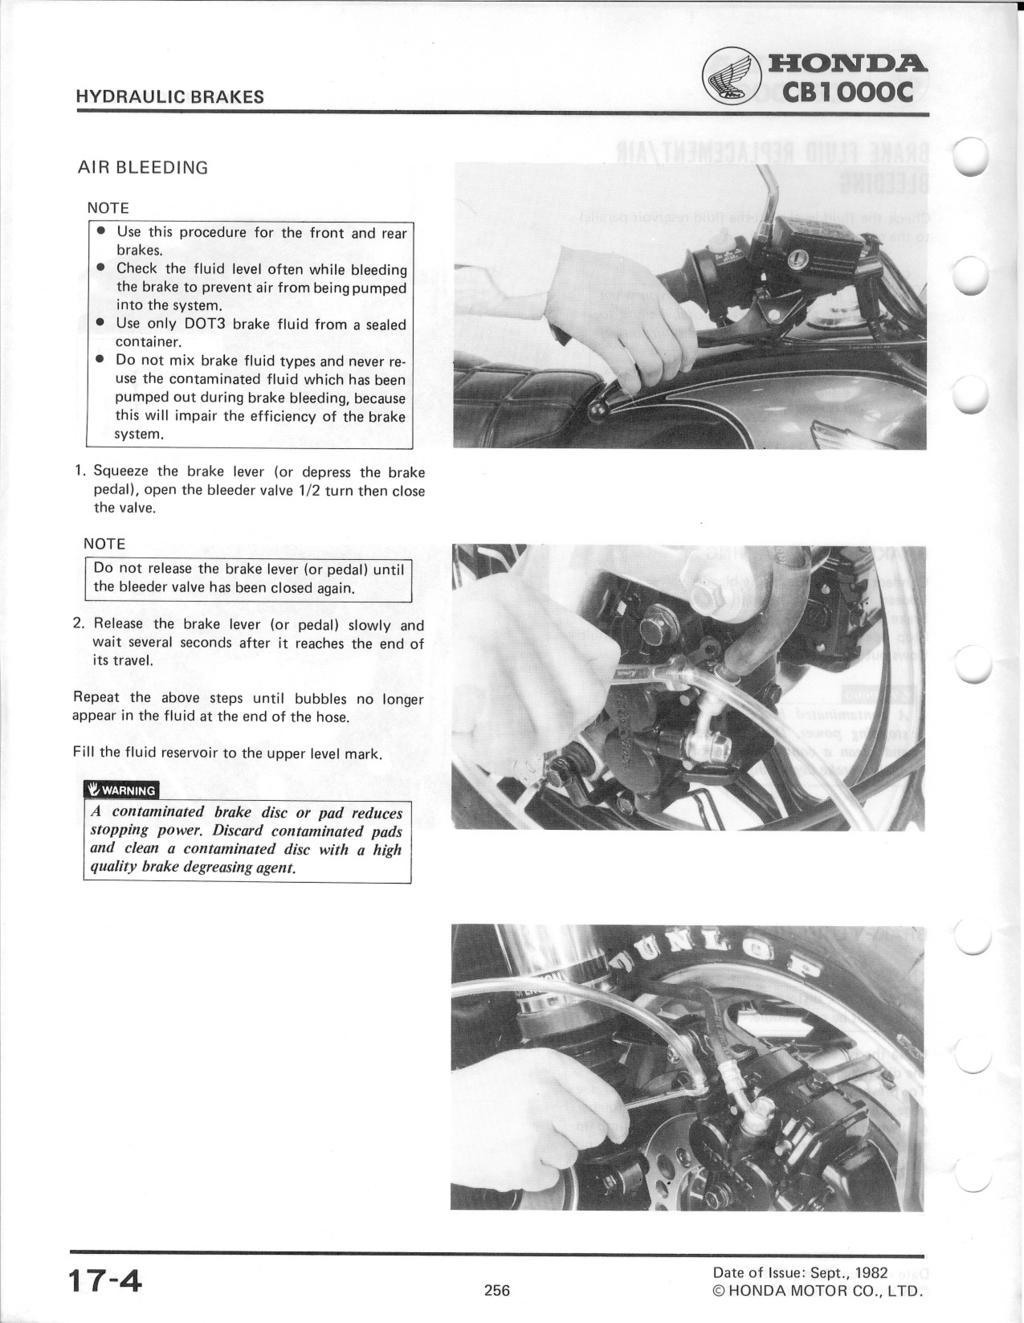 ~:H:OlVJ:).A. AIR BLEEDING NOTE.--use this procedure for the front and rear brakes. Check the fluid level often while bleeding the brake to prevent air from being pumped into the system.